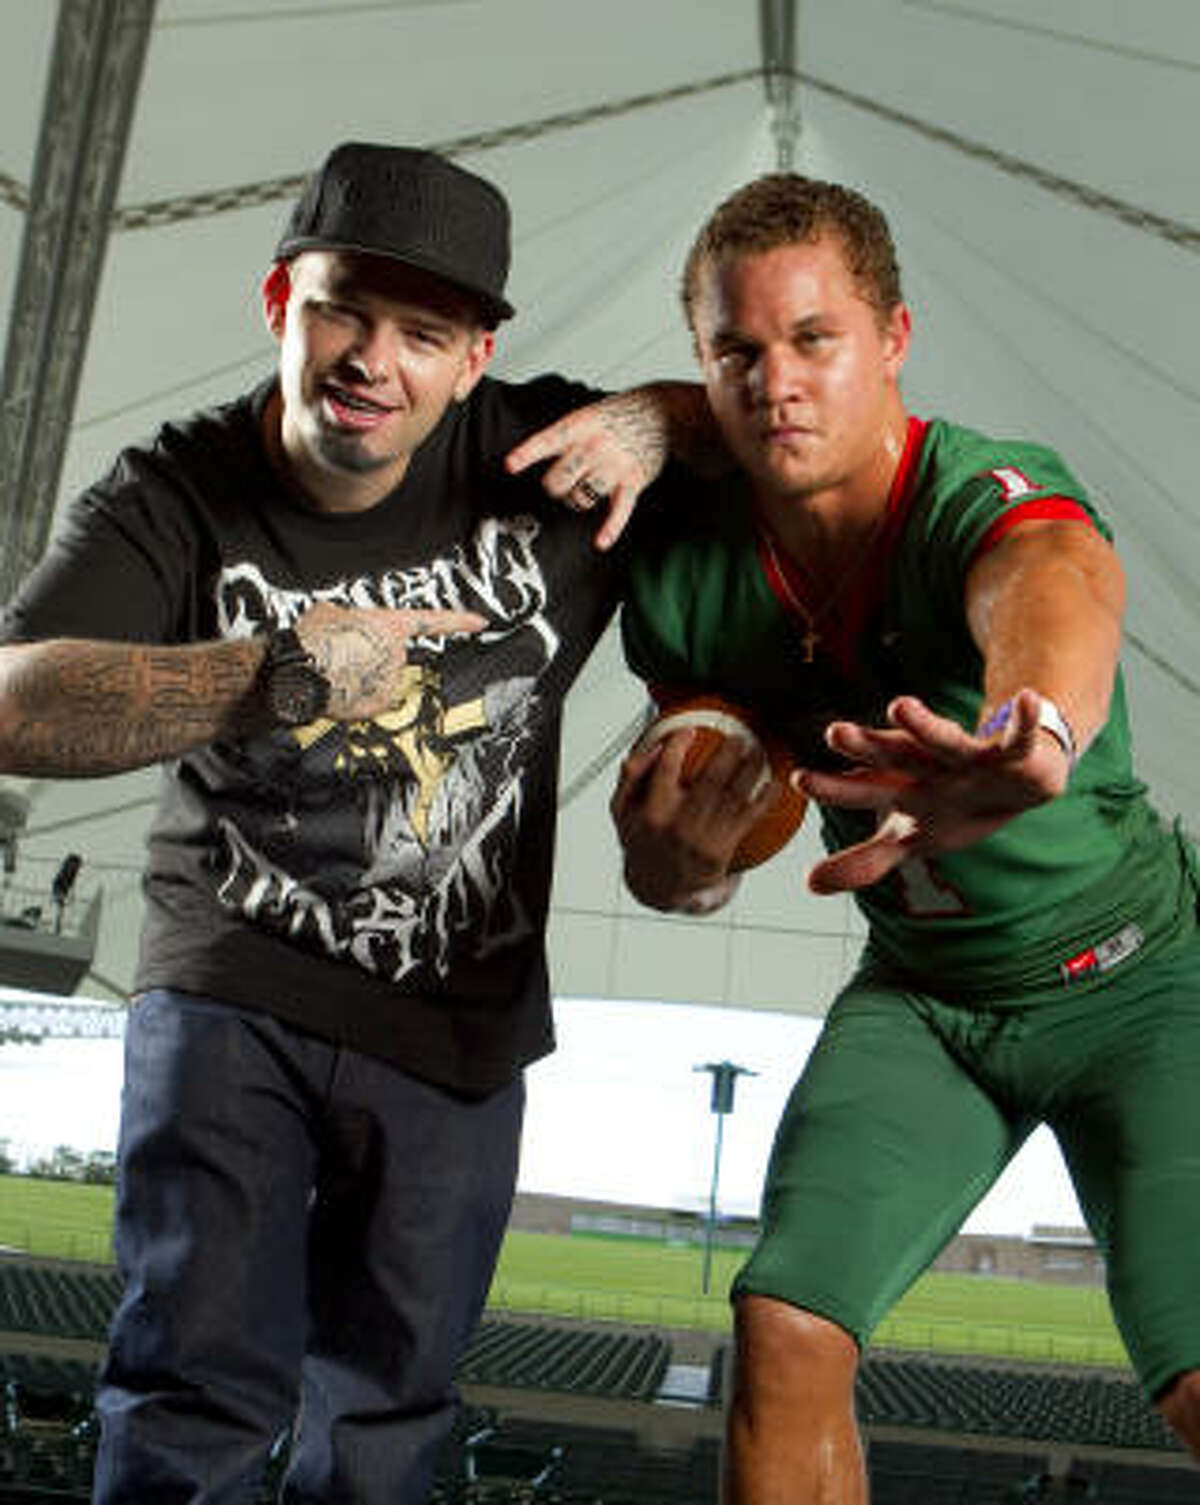 Paul Wall and The Woodlands running back Daniel Lasco both do their best to 'represent' Texas.